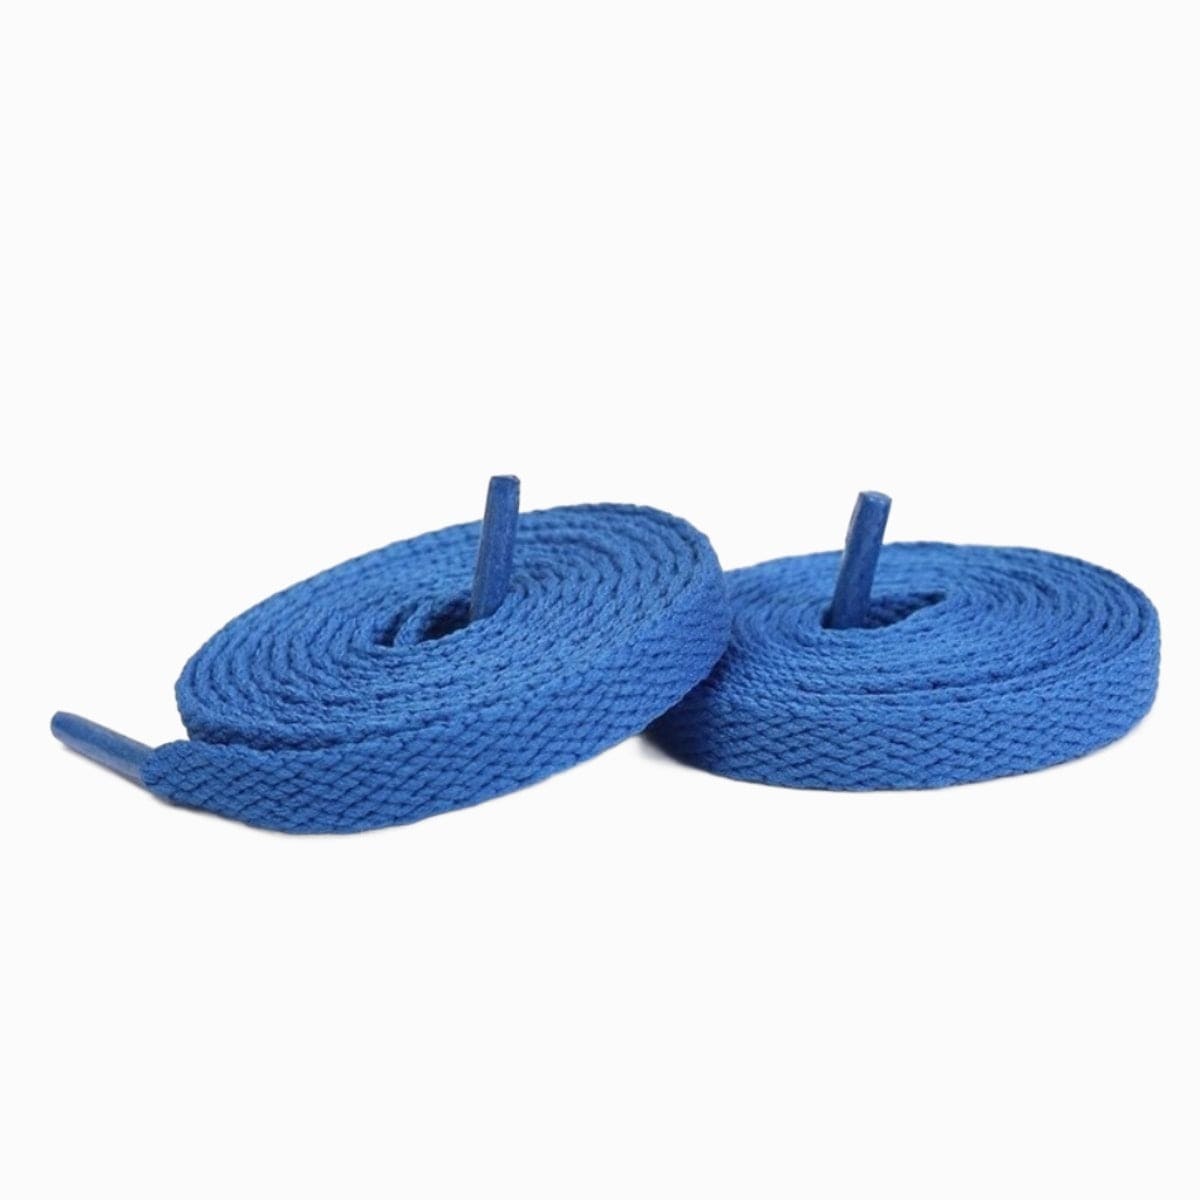 Royal Blue Replacement Laces for Adidas Continental 80 Sneakers by Kicks Shoelaces